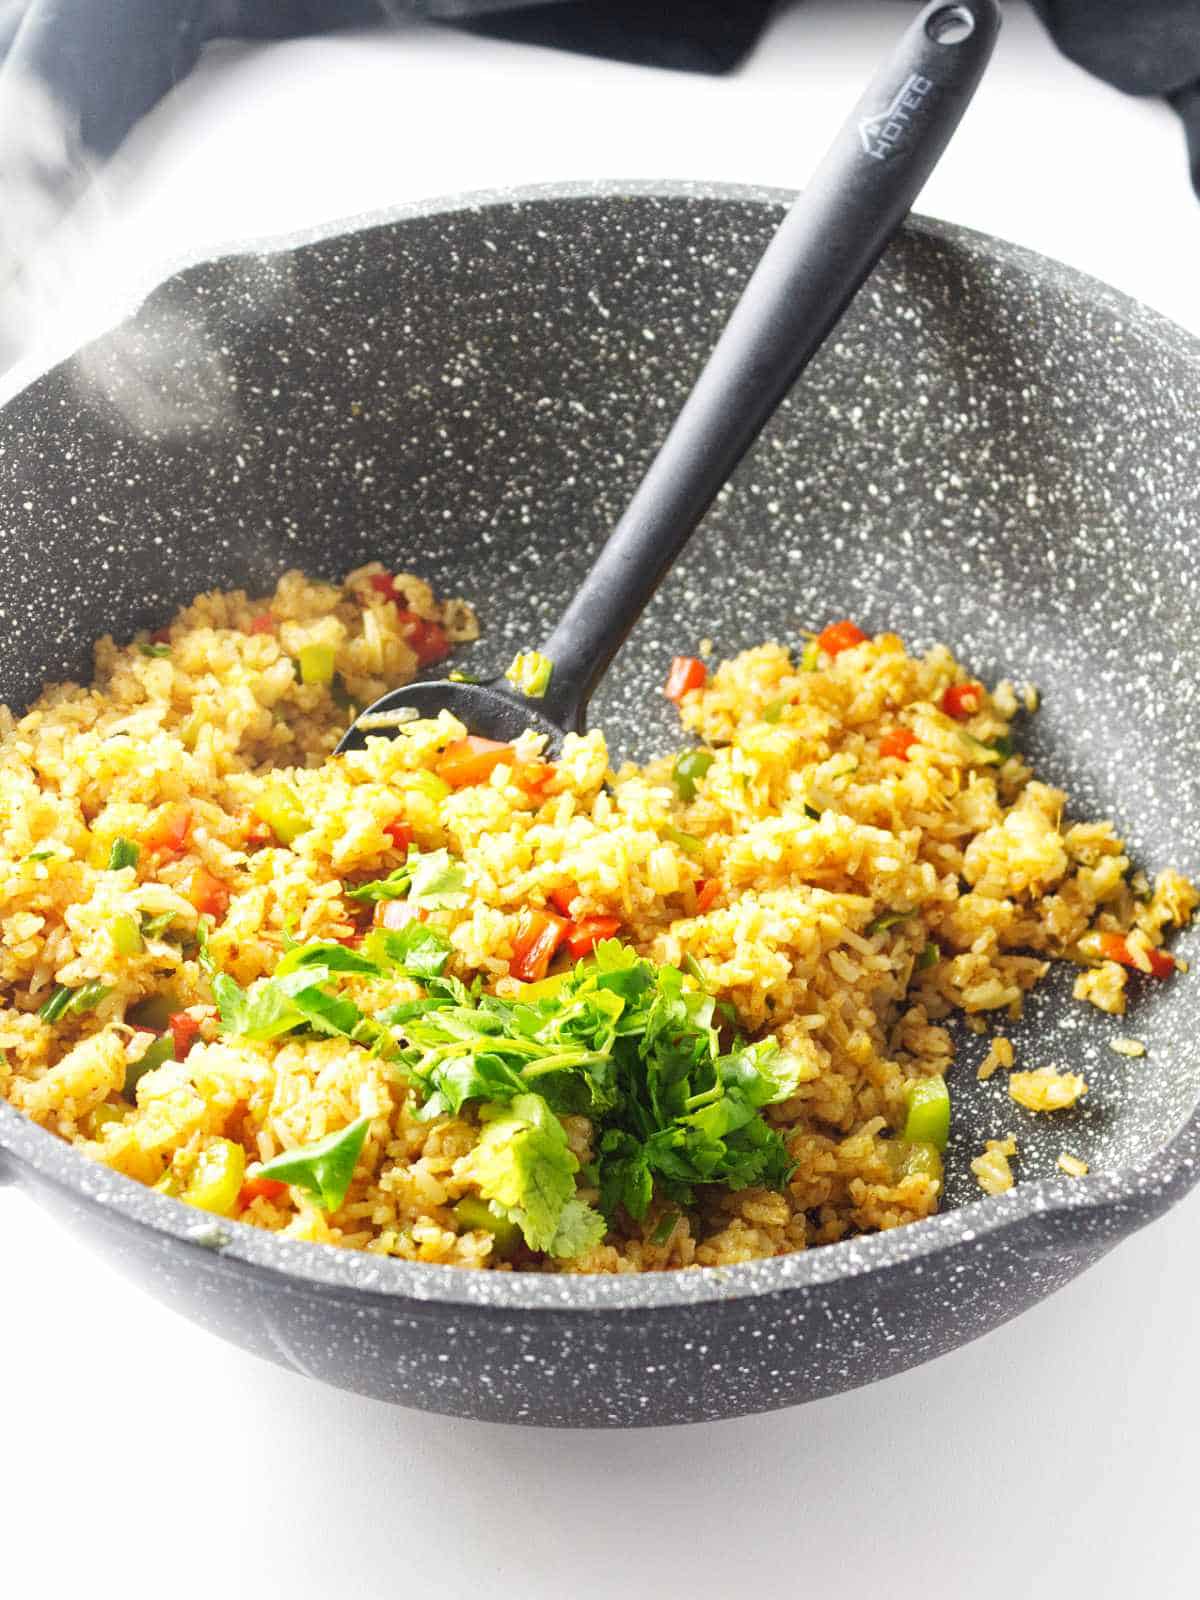 sauteed rice in a skillet with seasoning and vegetables.